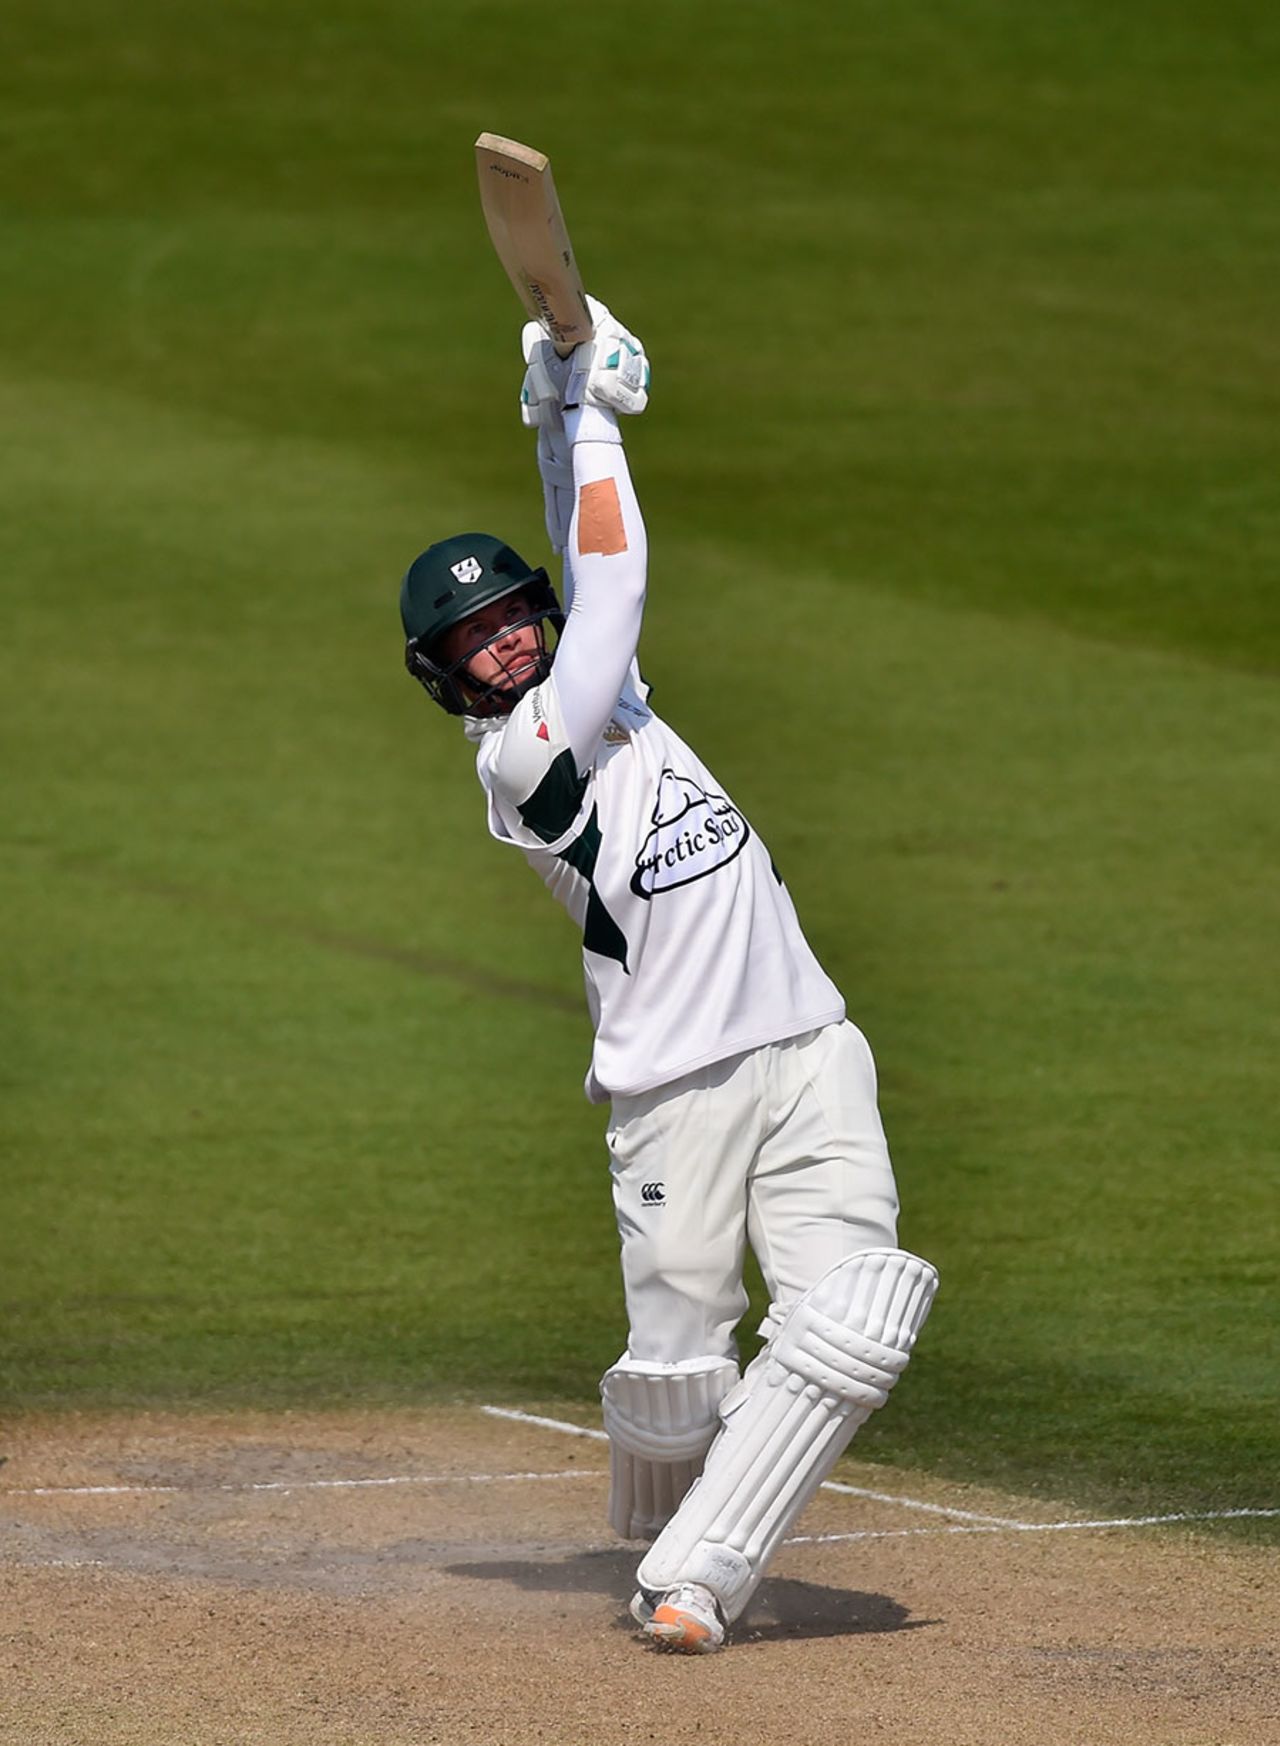 Alexei Kervezee played a vital knock from No. 6, Sussex v Worcestershire, County Championship Division One, Hove, 2nd day, April 20, 2015